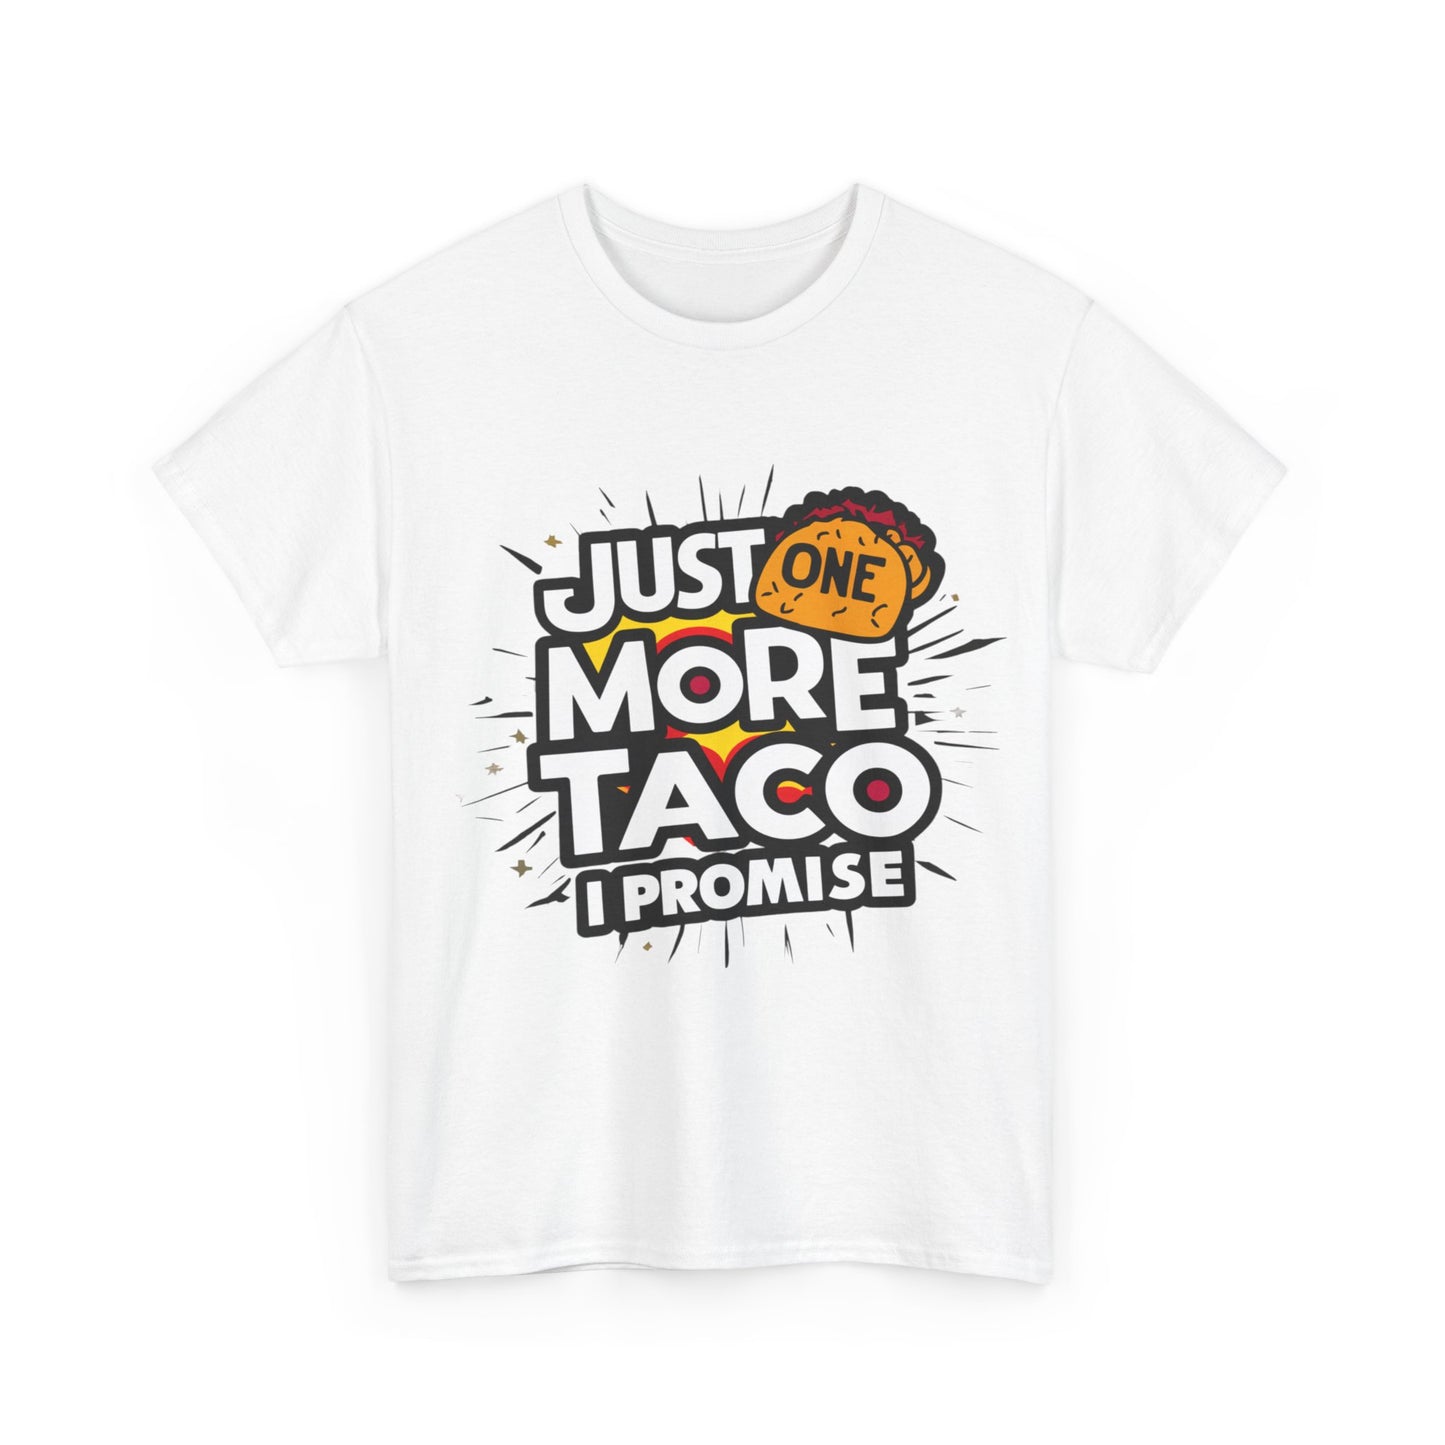 Copy of Just One More Taco I Promise Mexican Food Graphic Unisex Heavy Cotton Tee Cotton Funny Humorous Graphic Soft Premium Unisex Men Women White T-shirt Birthday Gift-42